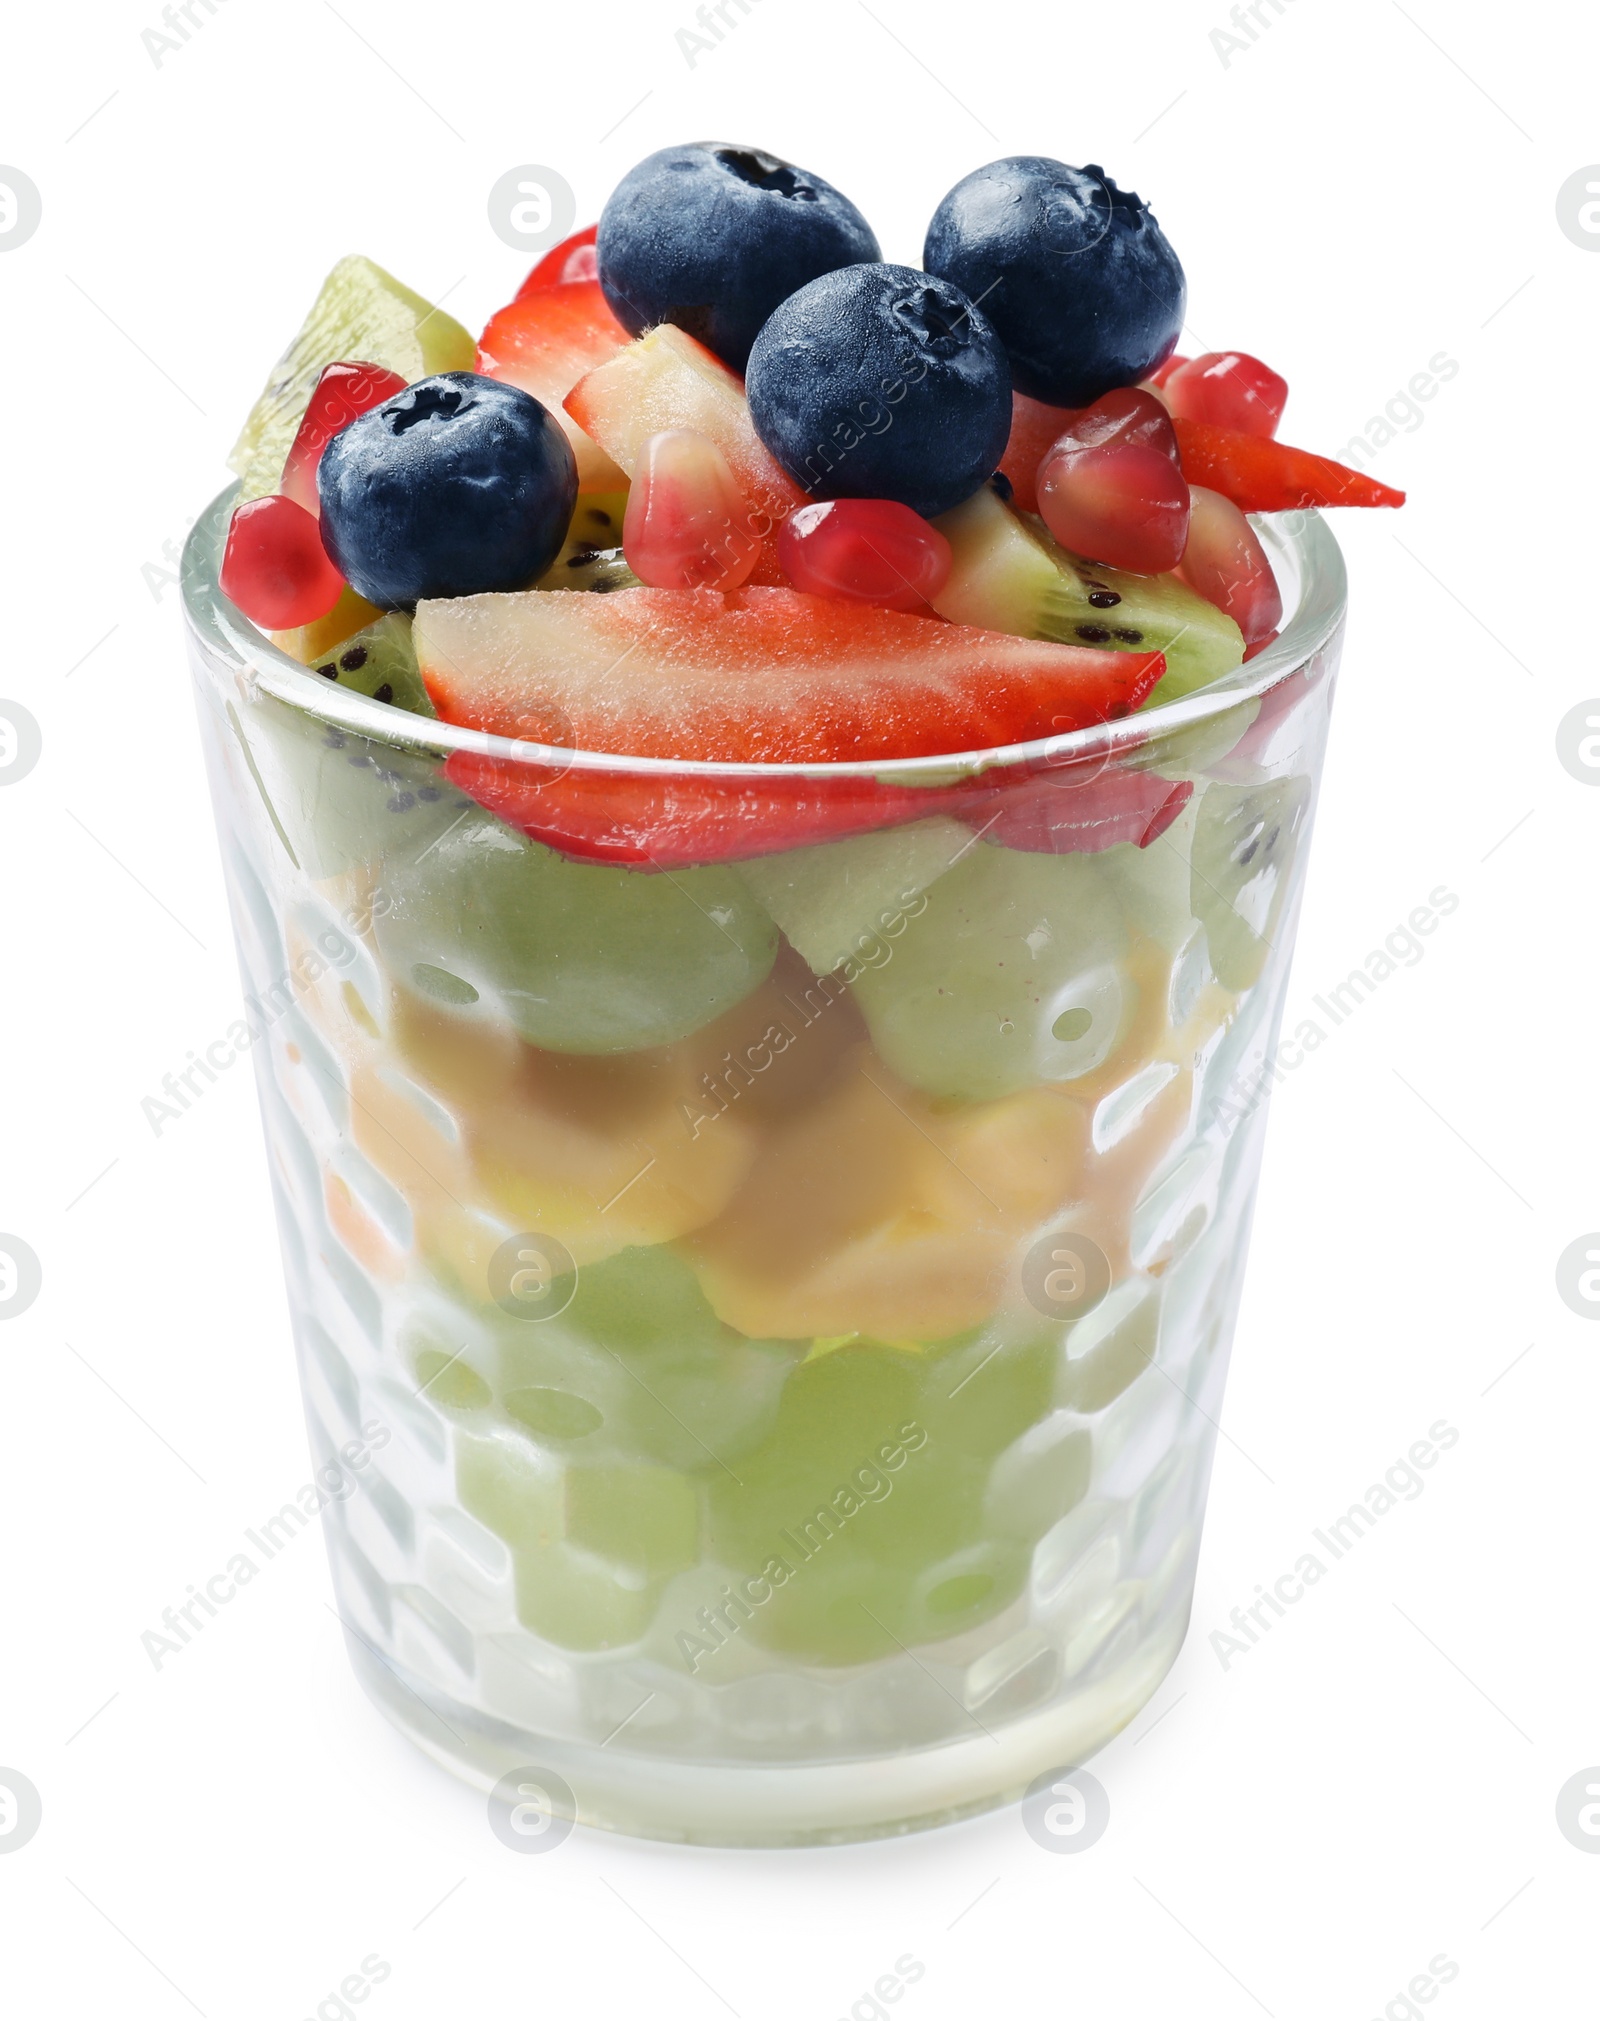 Photo of Healthy breakfast. Delicious fruit salad in glass isolated on white